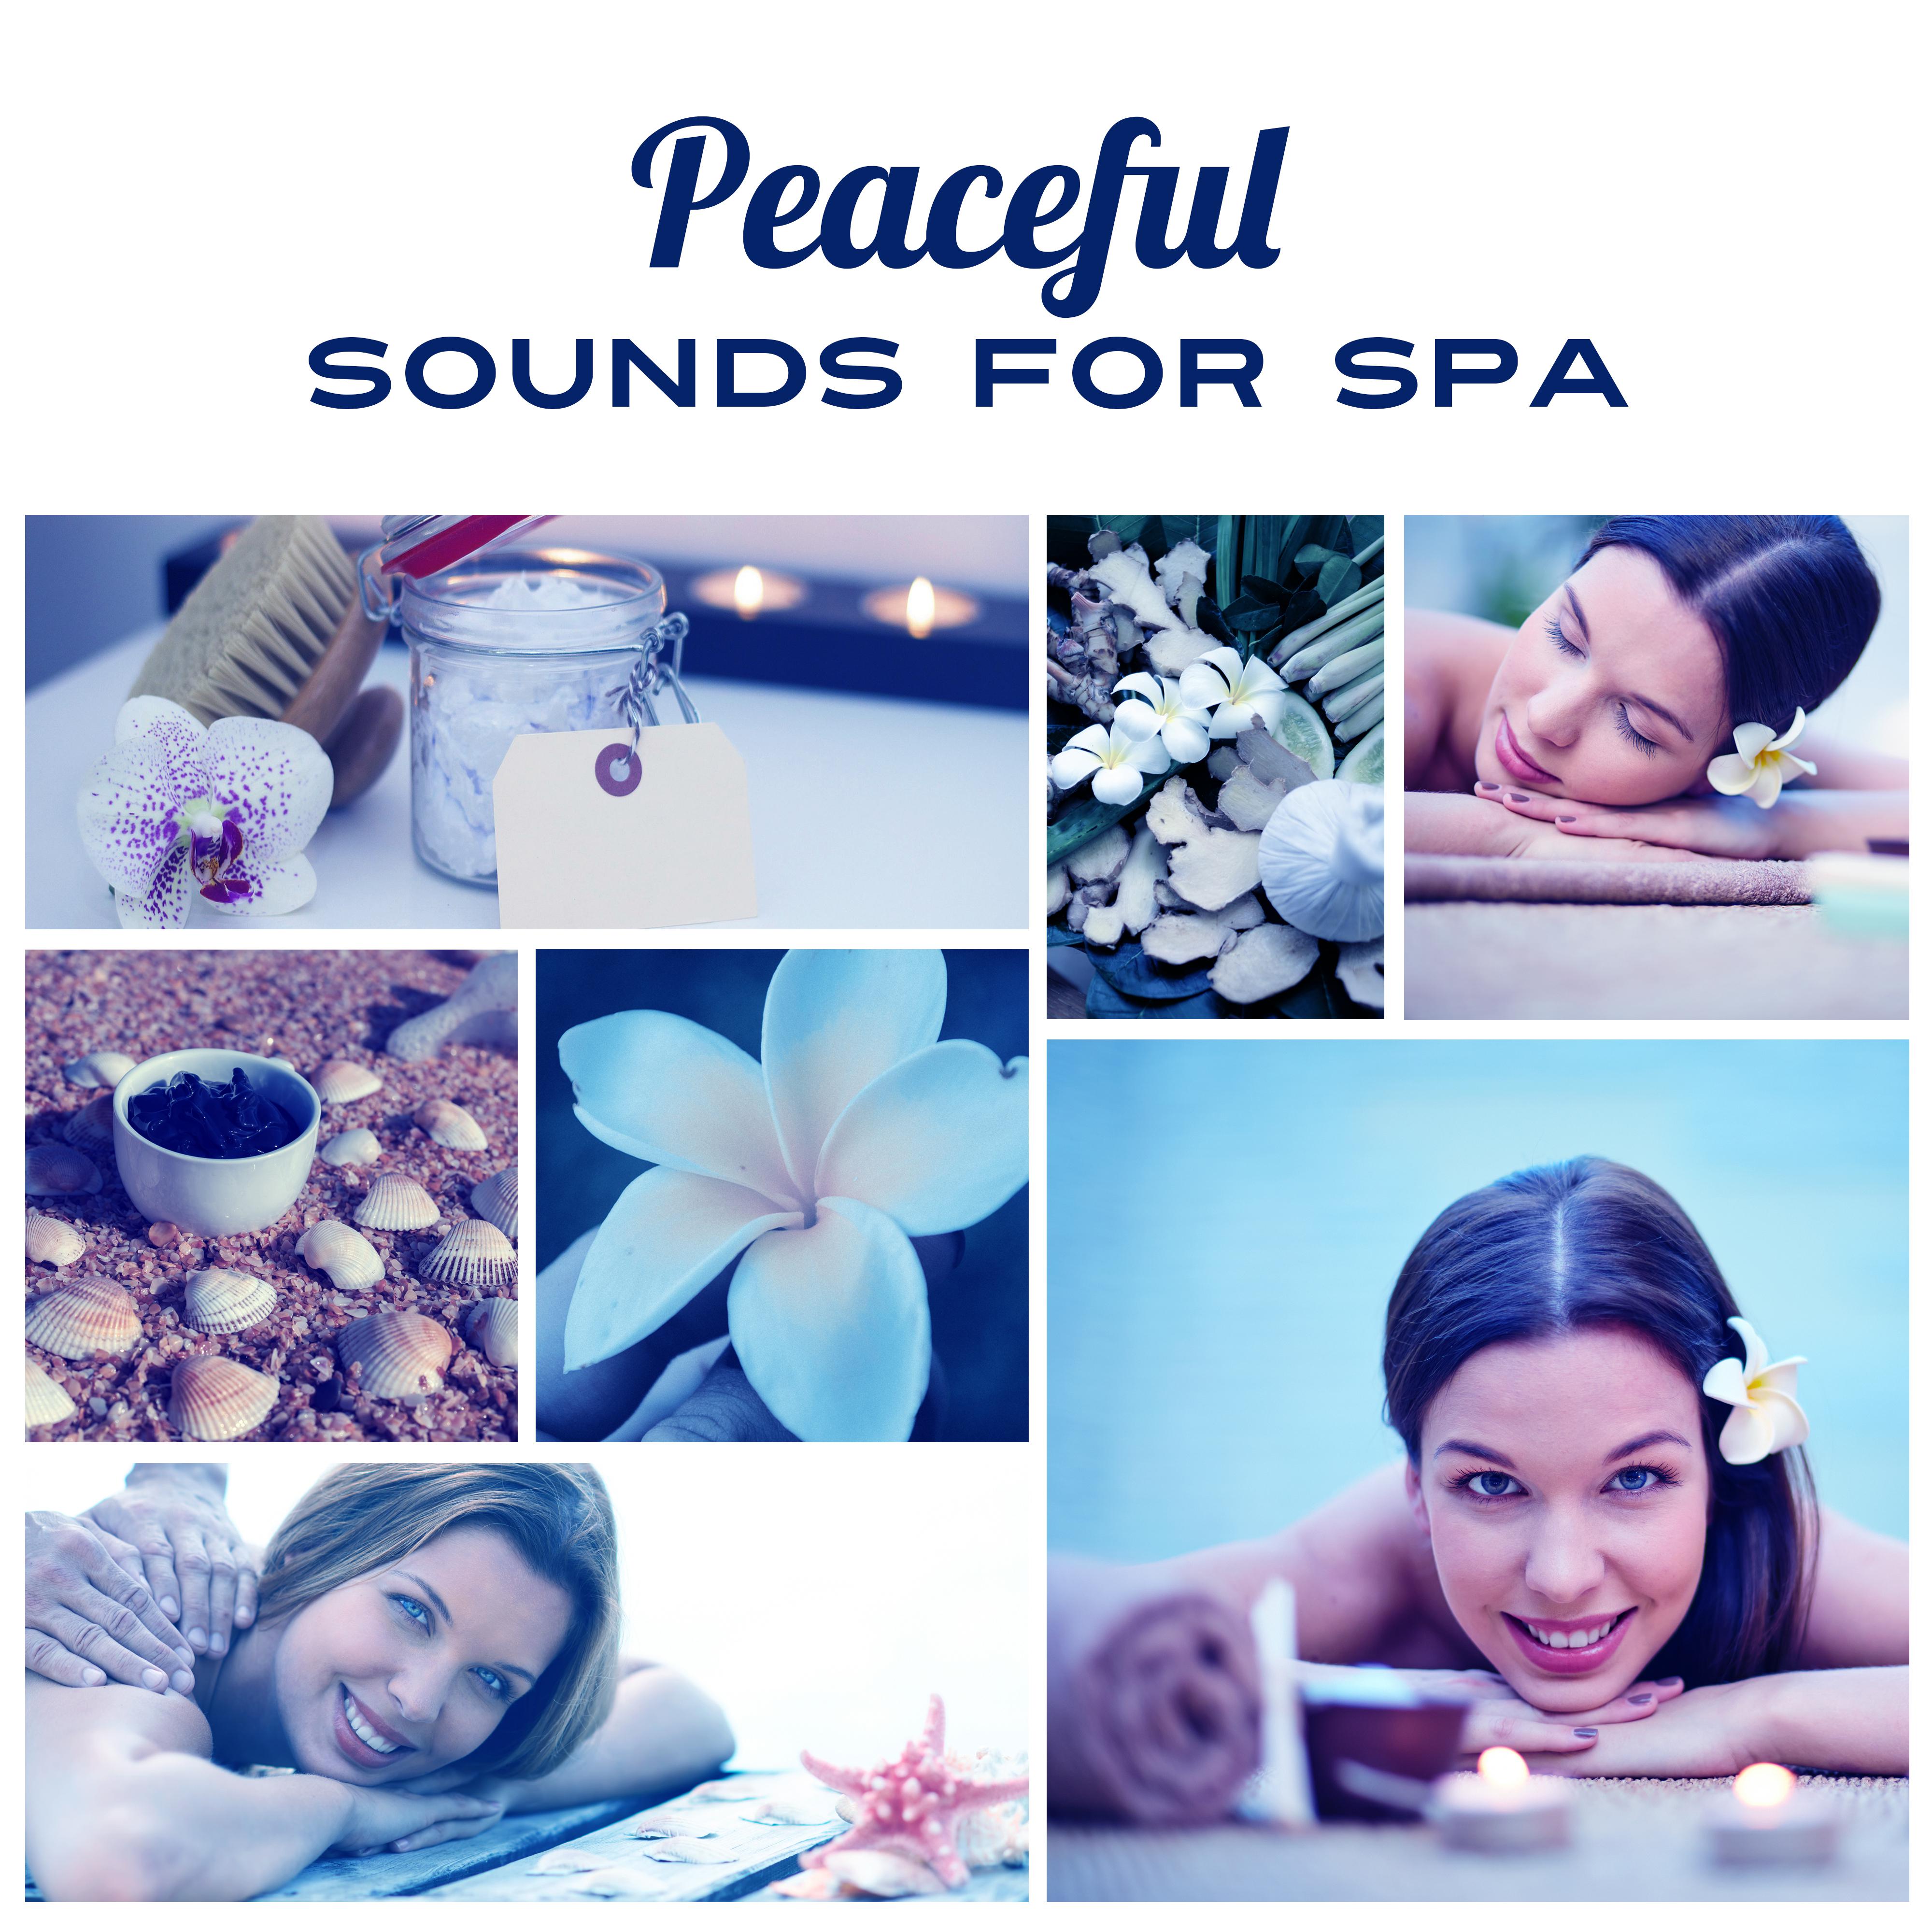 Peaceful Sounds for Spa  Soft Music, Relaxation Wellness, Meditation Spa, Soothing Water, Nature Sounds for Rest, Deep Sleep